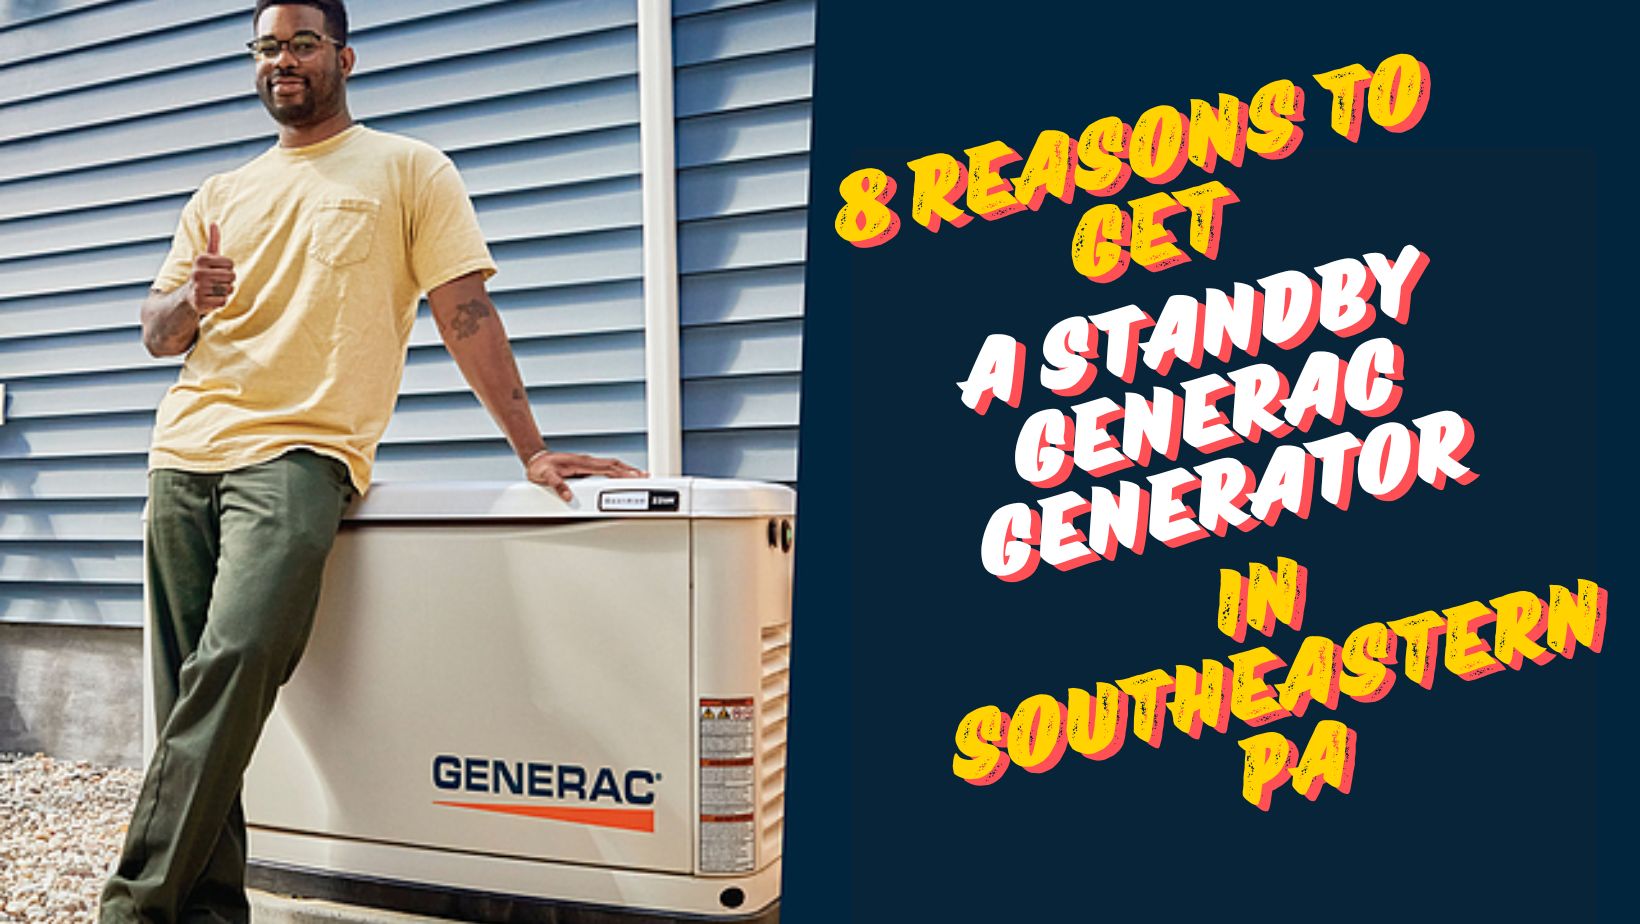 8 Reasons to Get a Standby Generac Generator in Southeastern PA